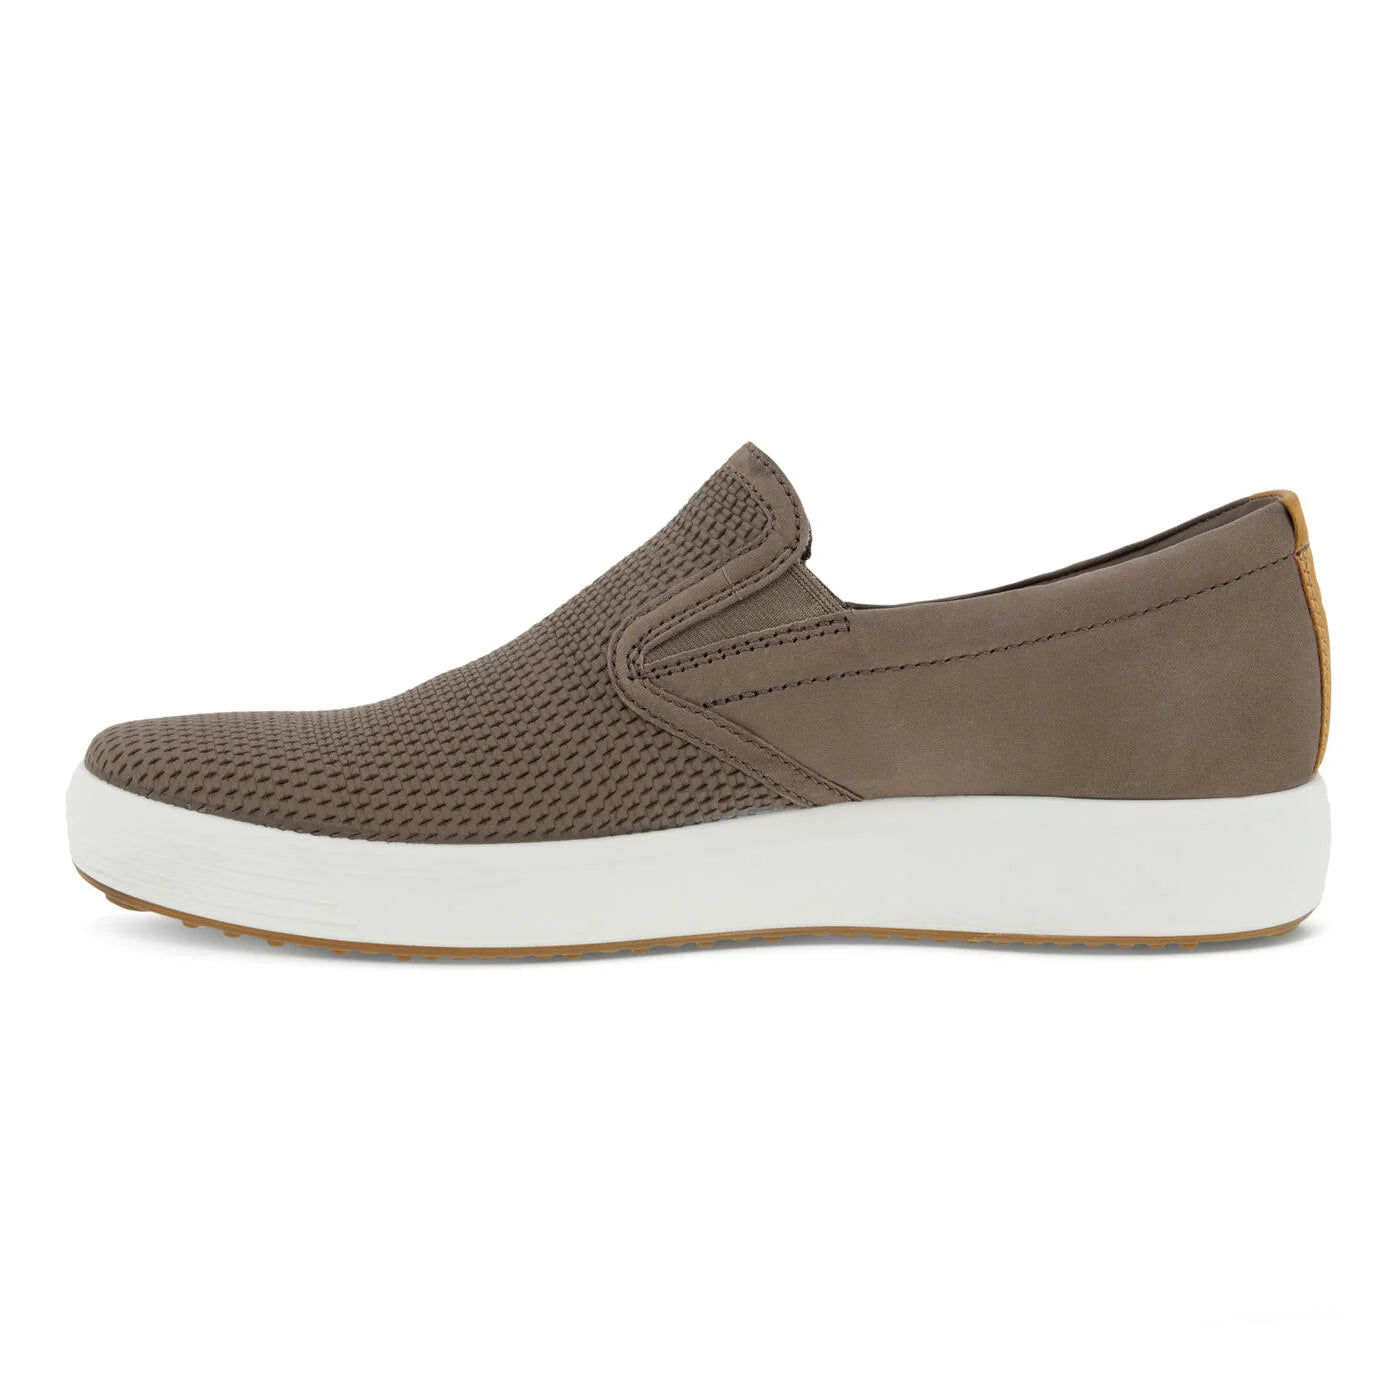 ECCO Men's Soft 7 Slip-On Sneakers Taupe